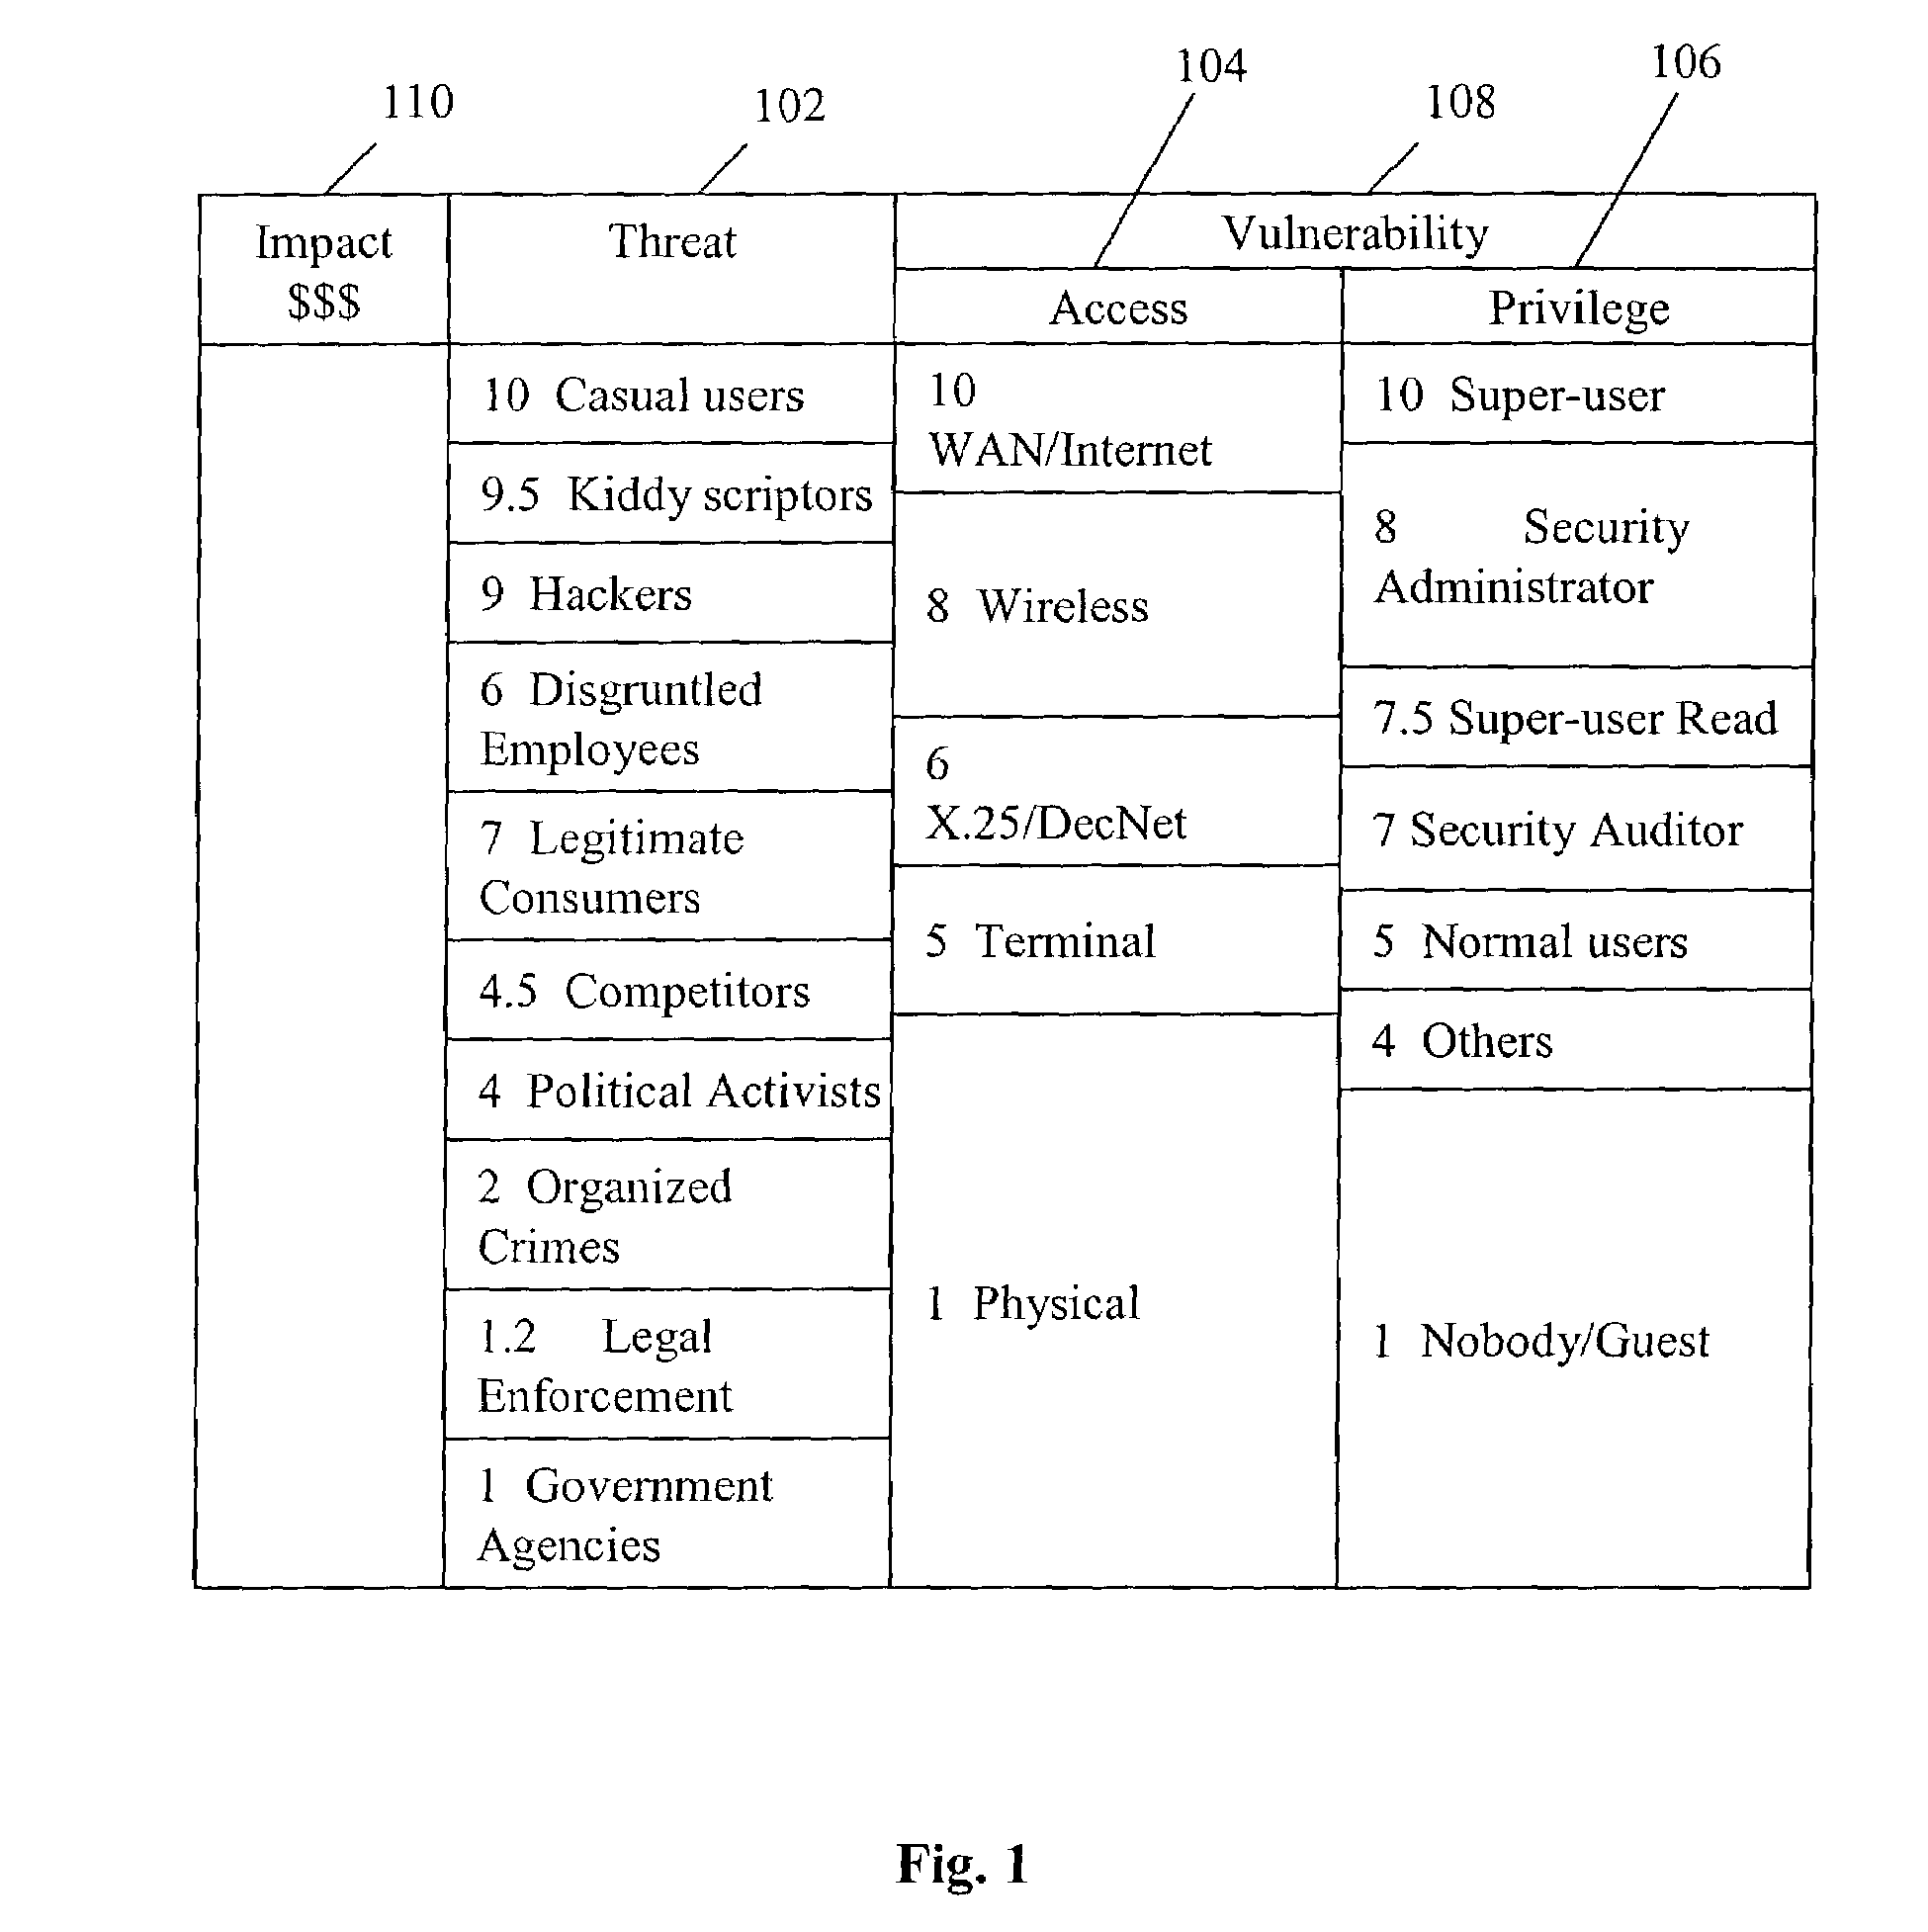 Method and system of assessing risk using a one-dimensional risk assessment model